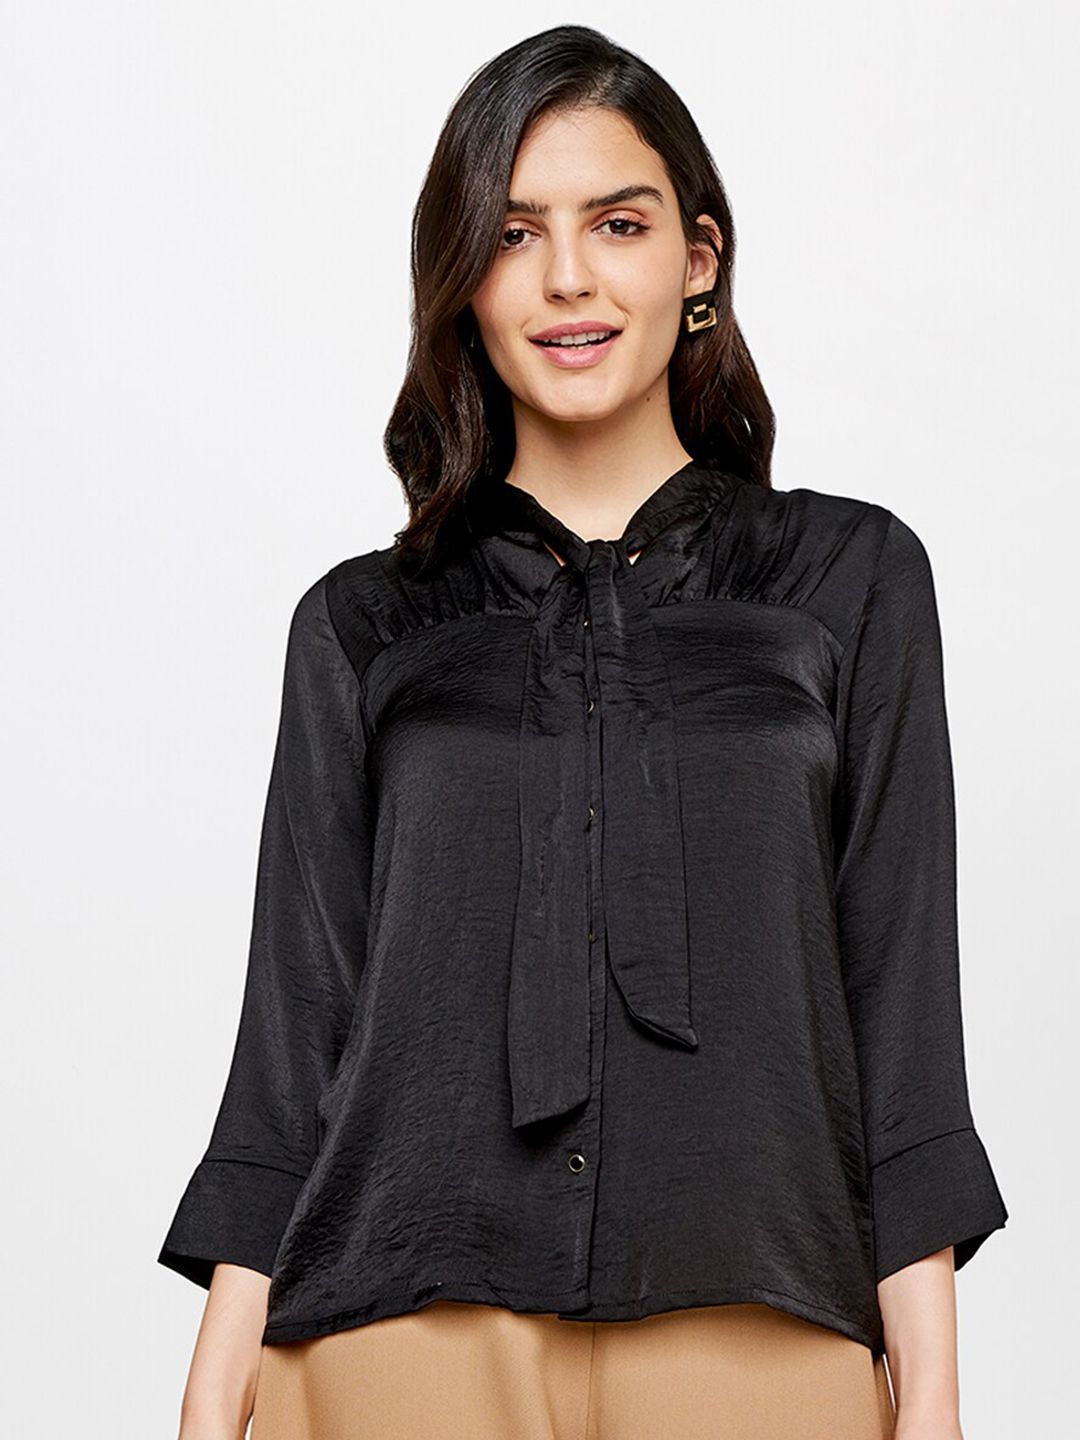 AND Black Shirt Collar Three Quarter Sleeves Top Price in India